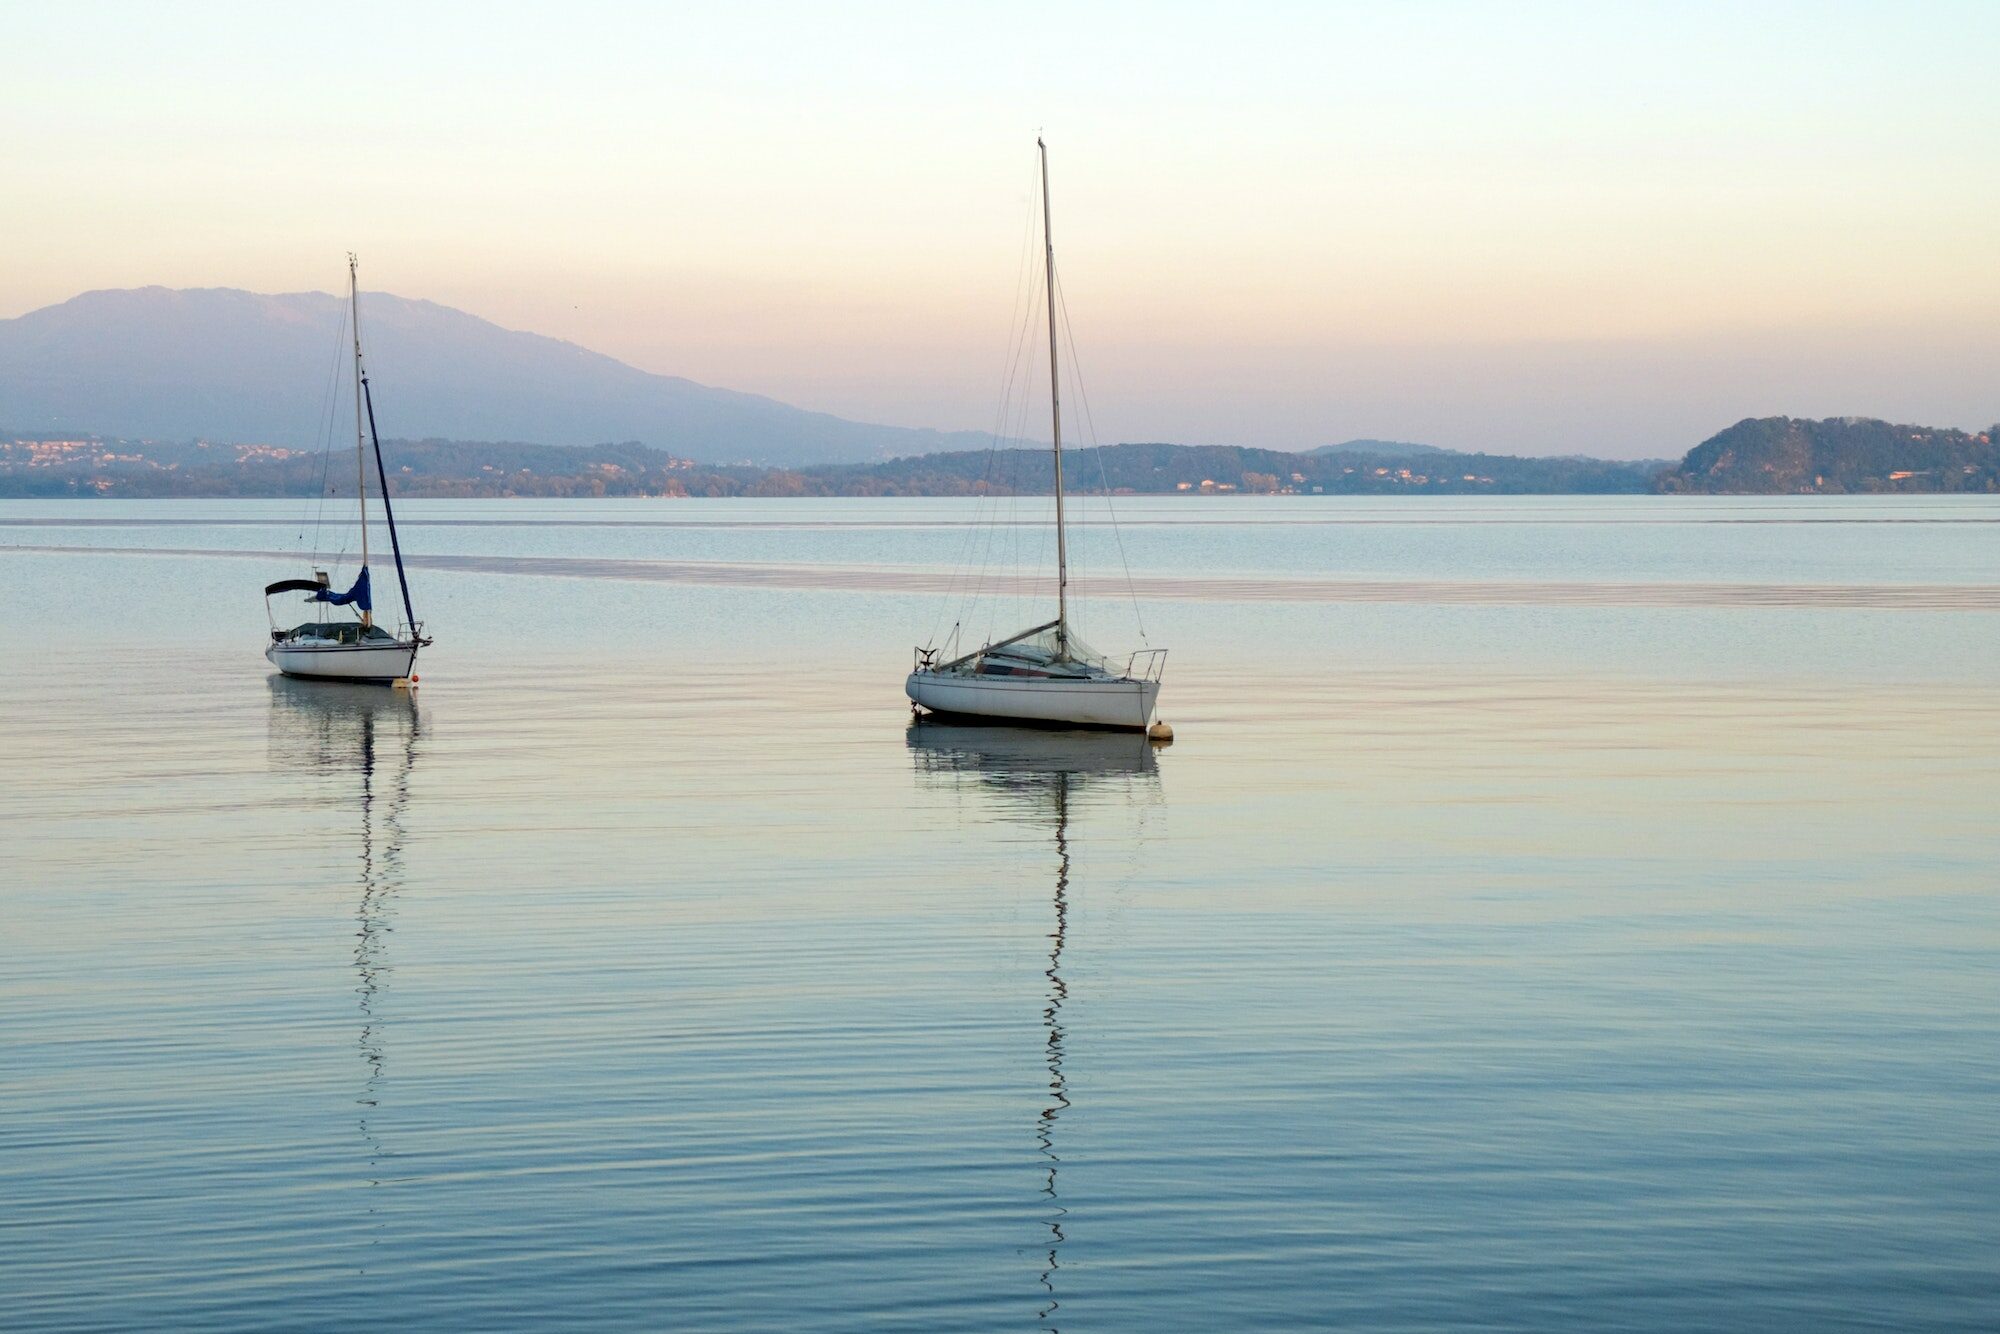 Sailboats in lake Maggiore (Italy) - sunset